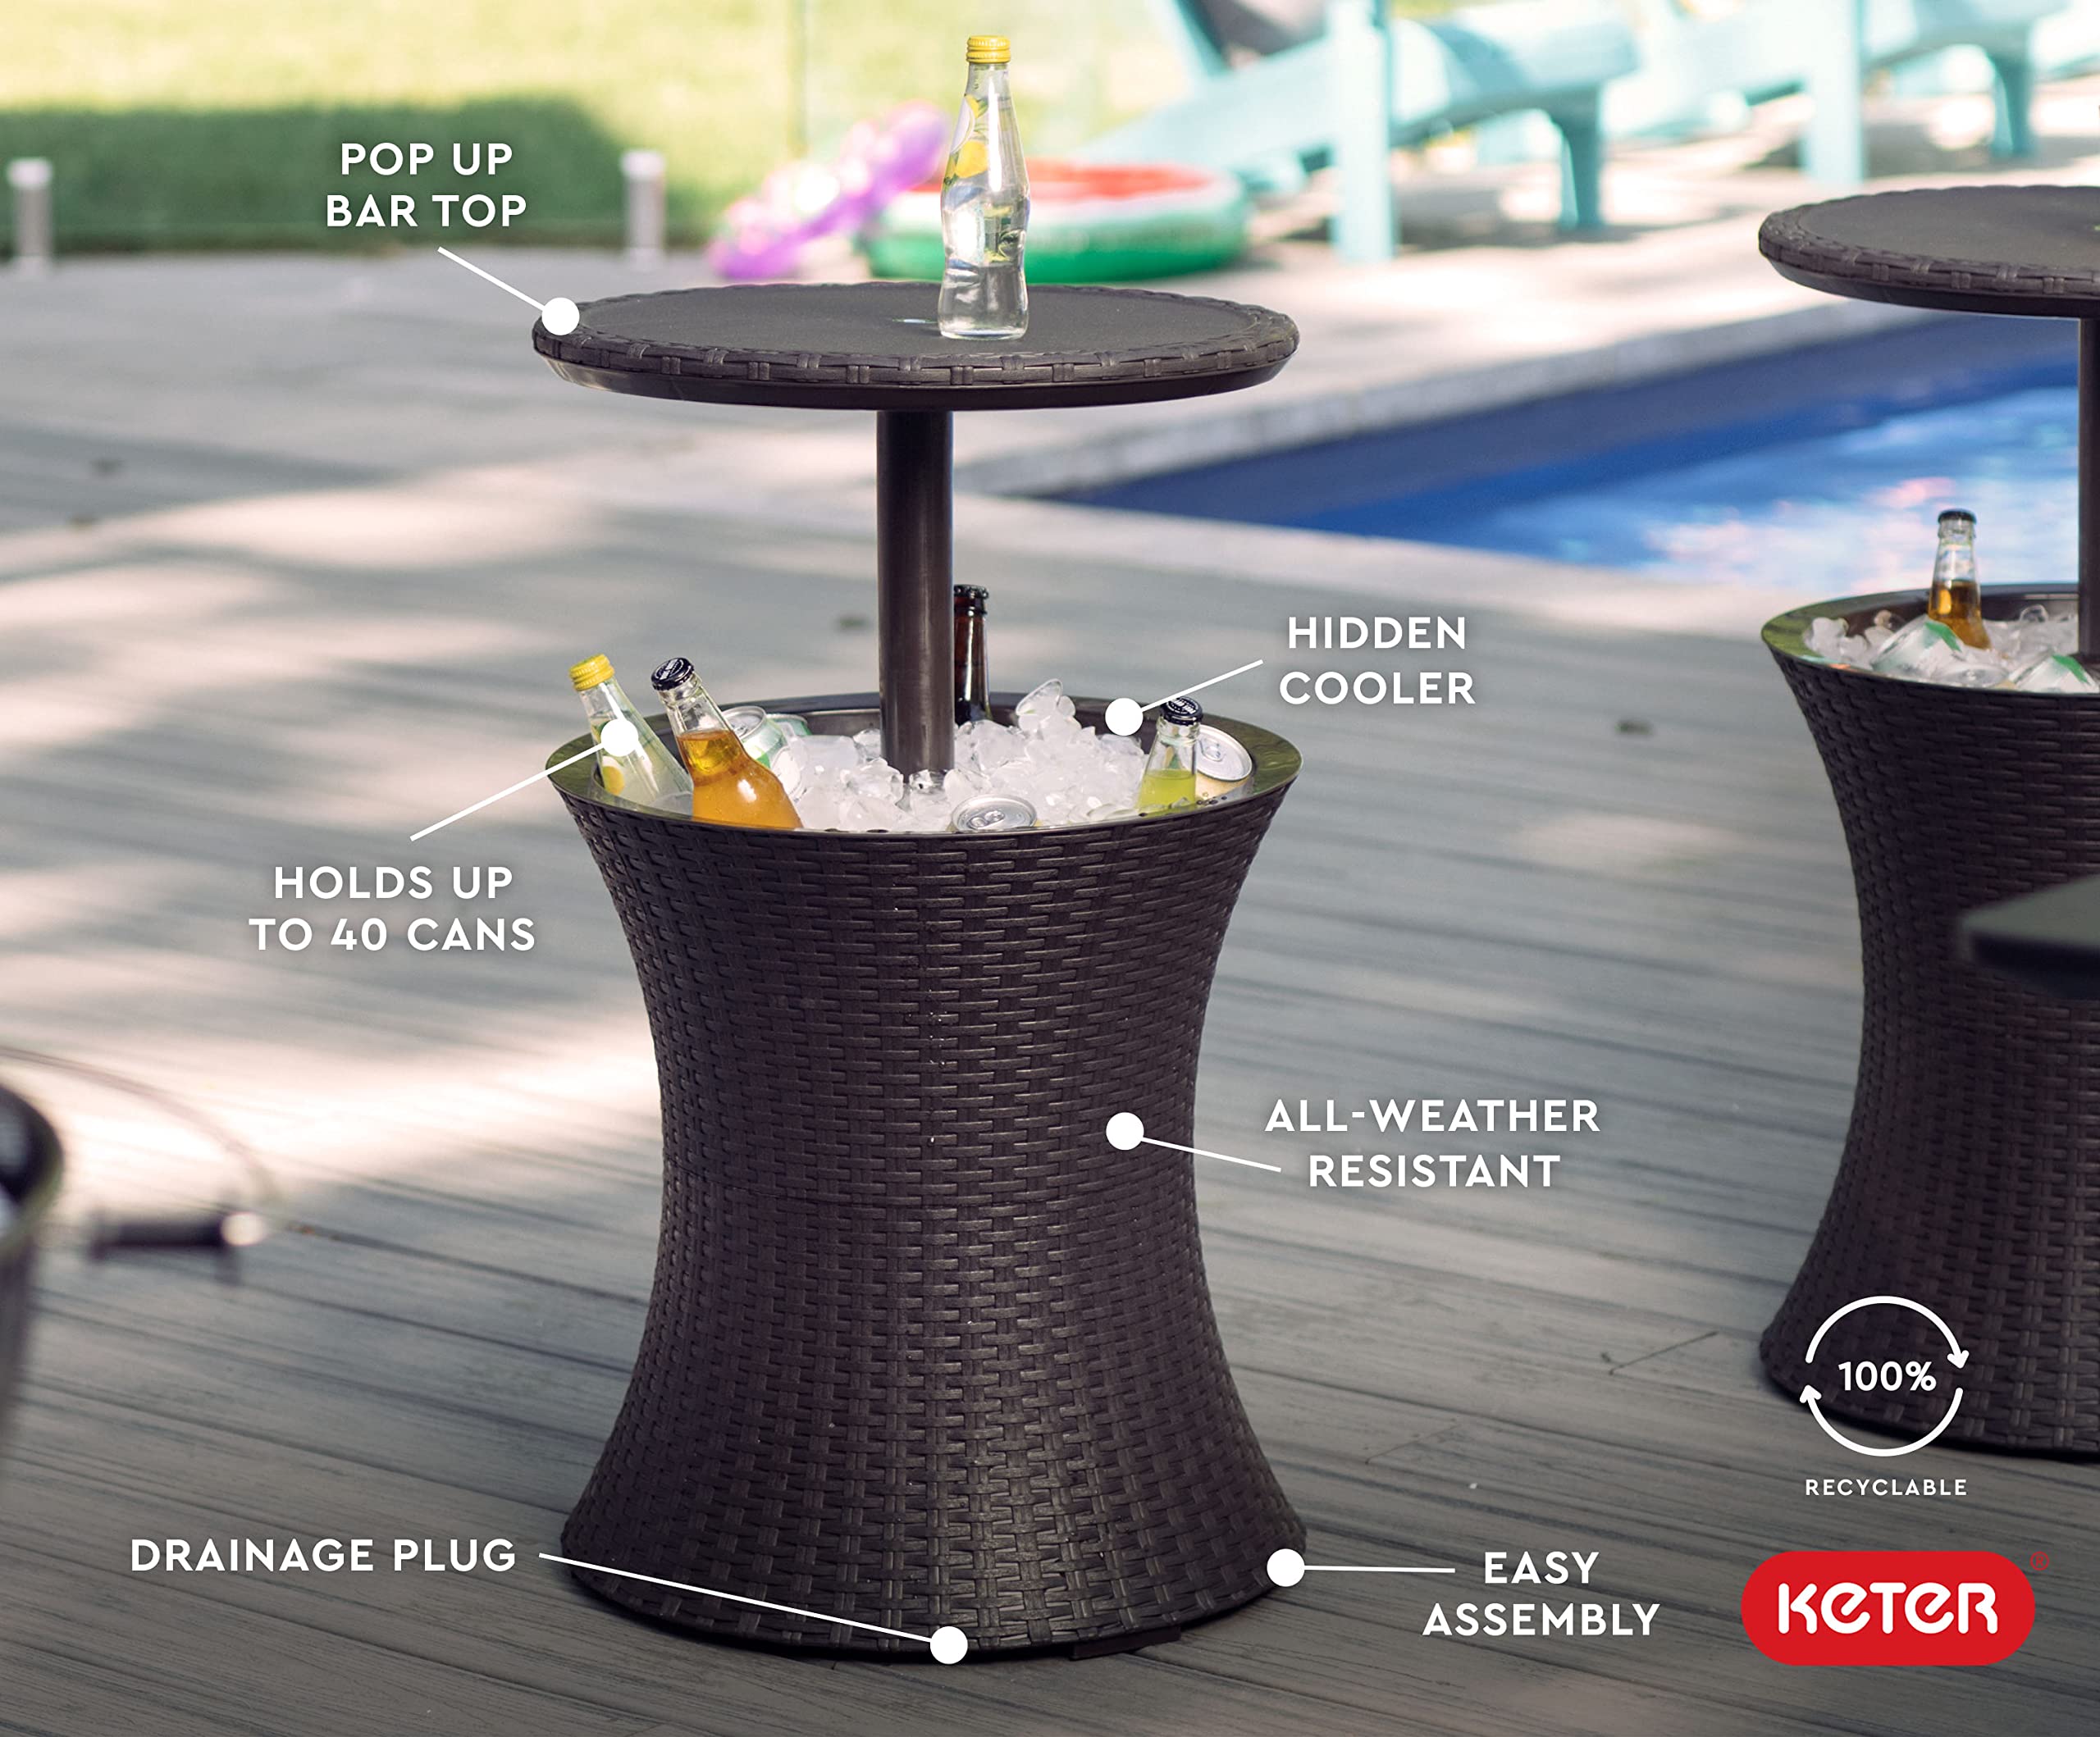 Keter Outdoor Patio Furniture and Hot Tub Side Table with 7.5 Gallon Beer and Wine Cooler, Brown